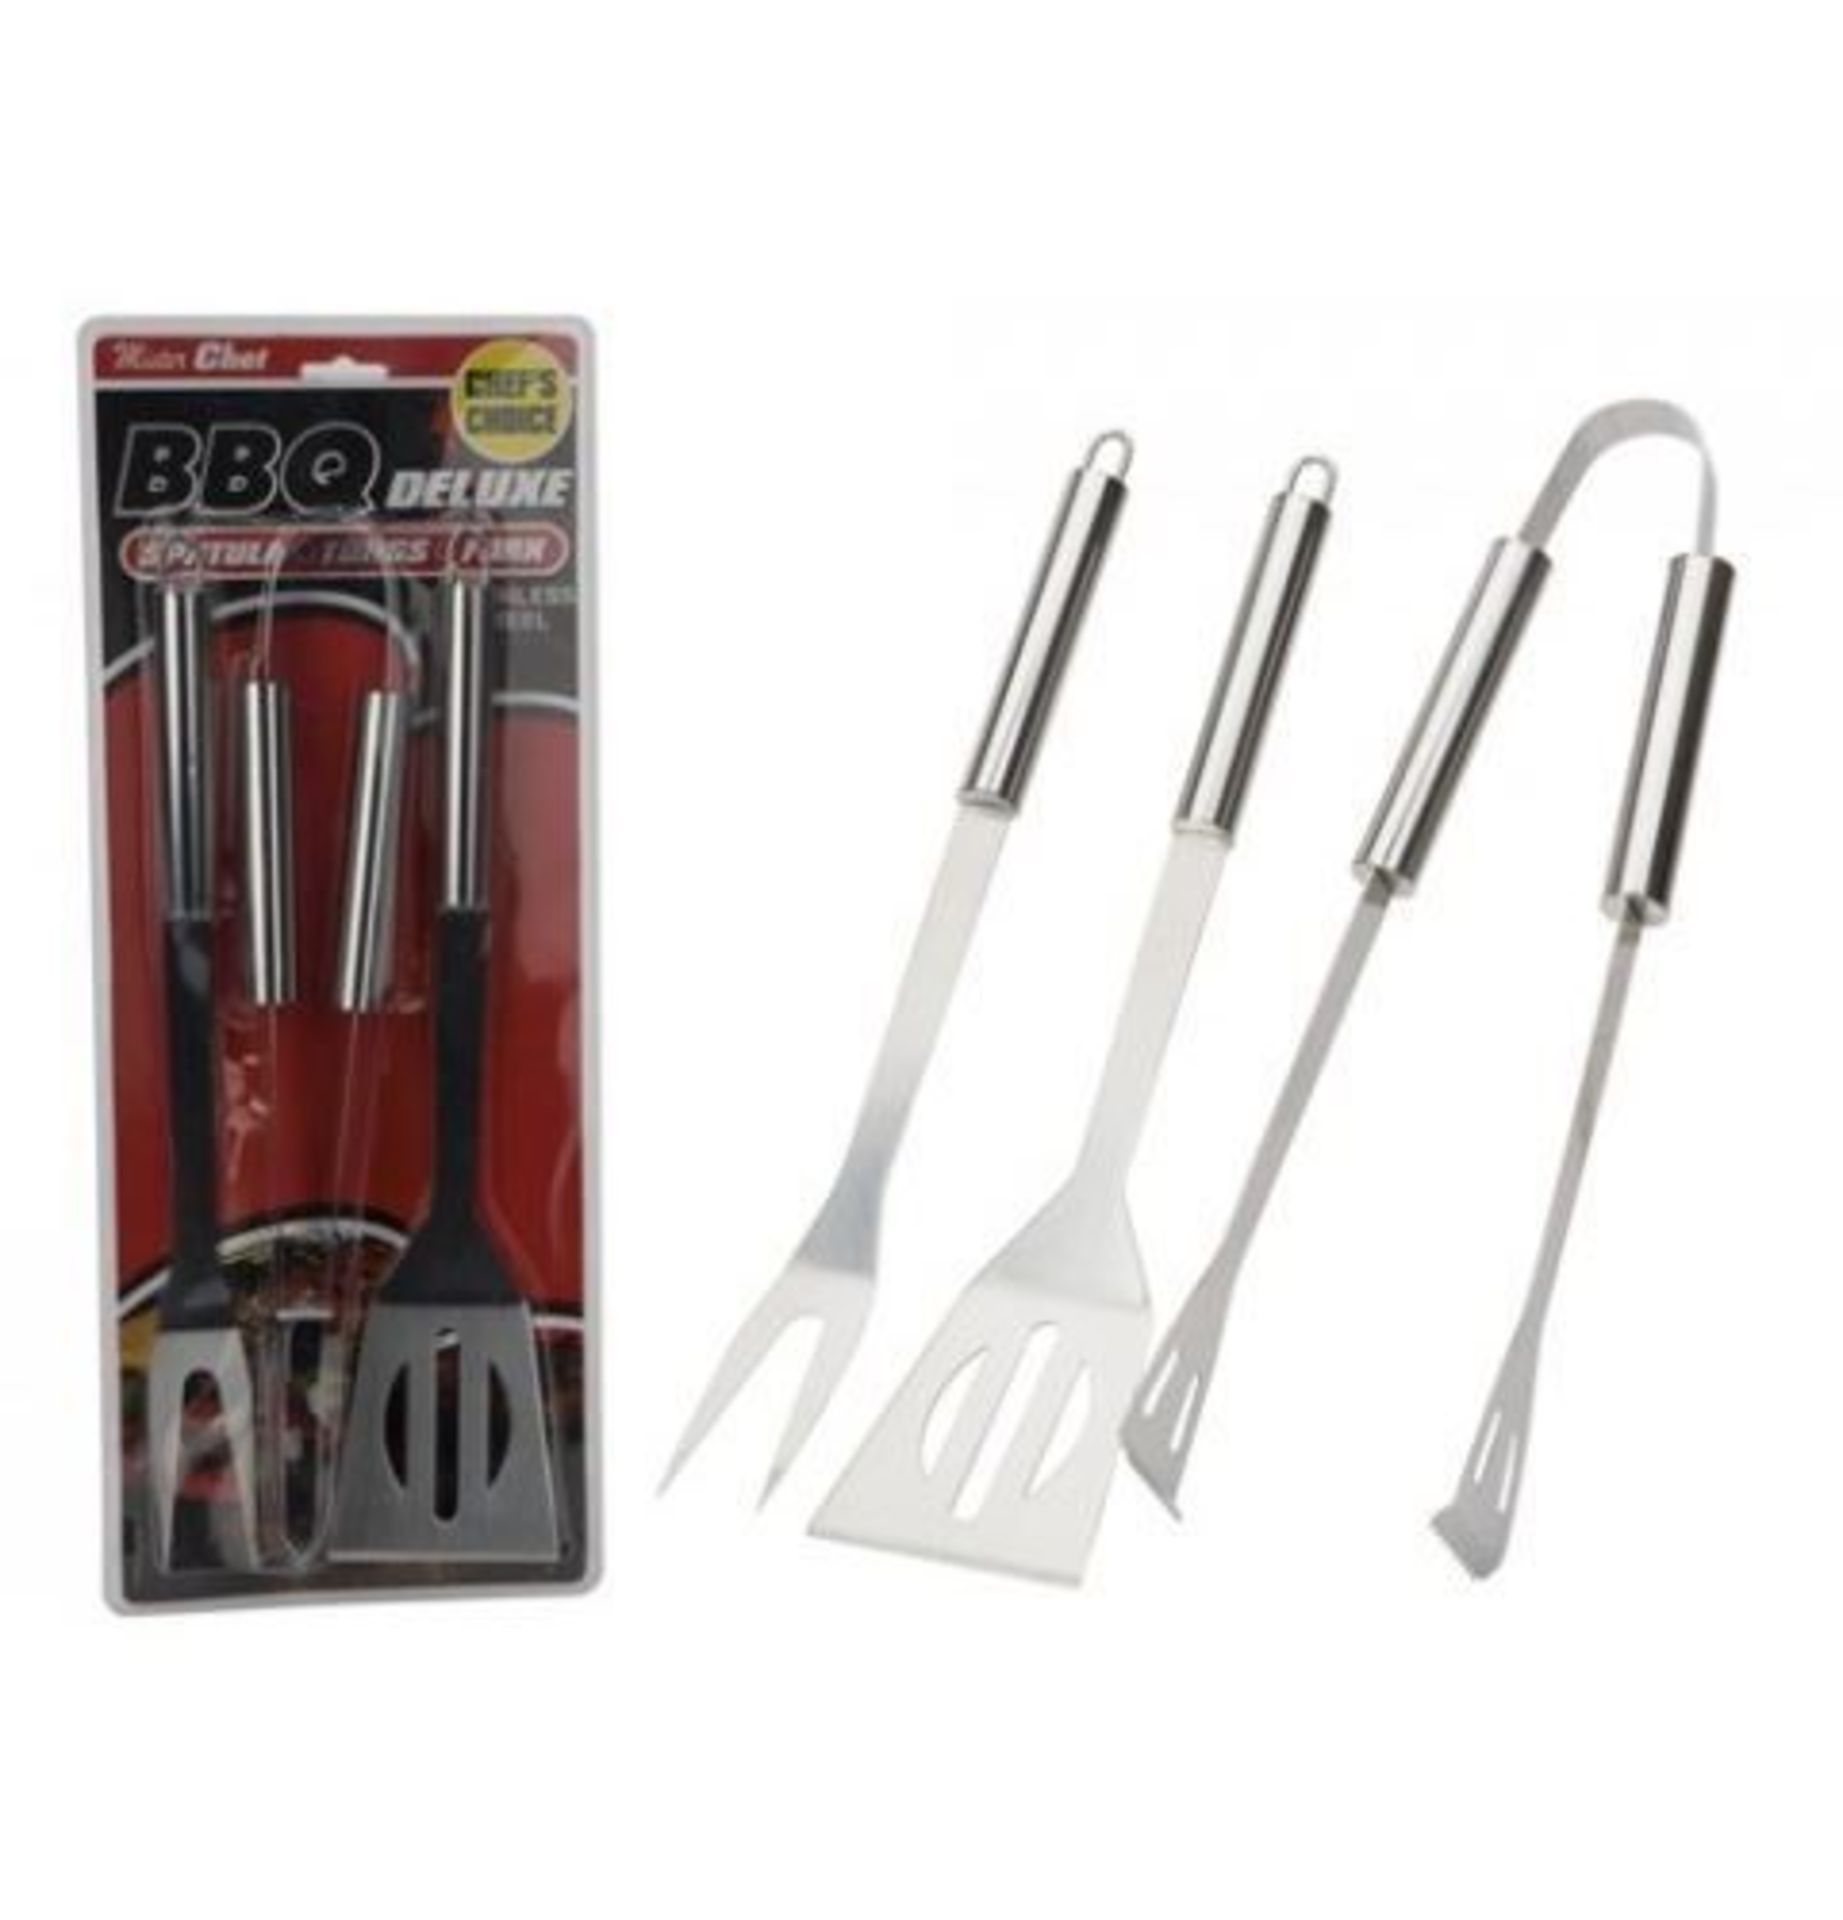 V *TRADE QTY* Brand New Stainless Steel Three Piece BBQ Tool Kit X 3 YOUR BID PRICE TO BE MULTIPLIED